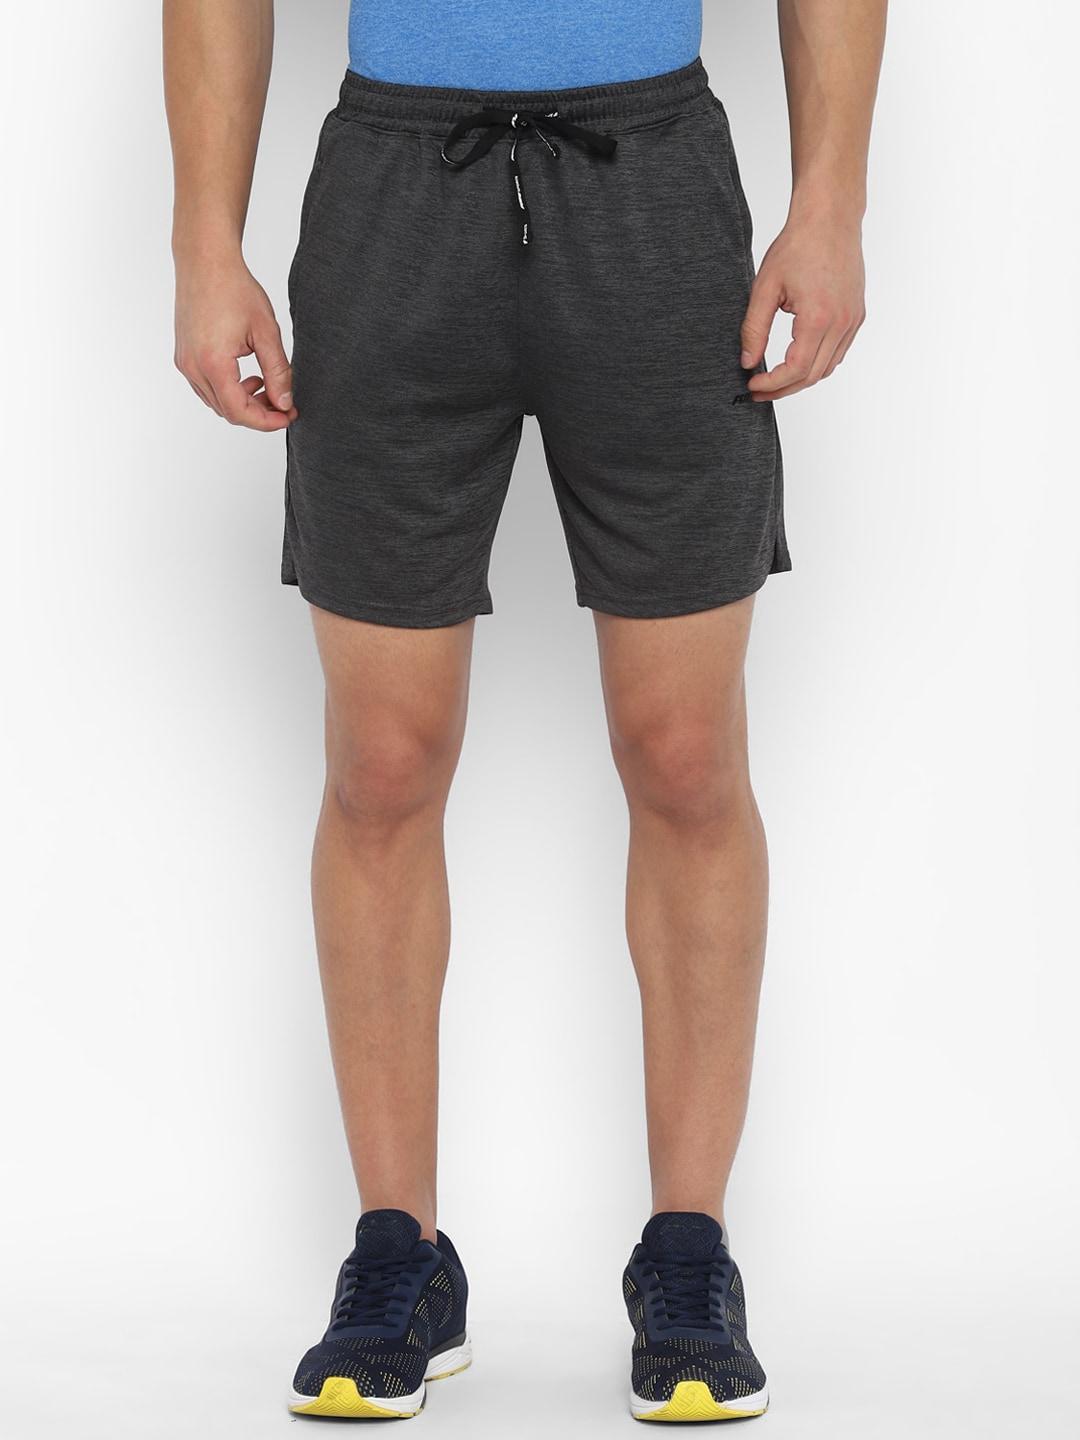 furo-by-red-chief-men-grey-sports-shorts